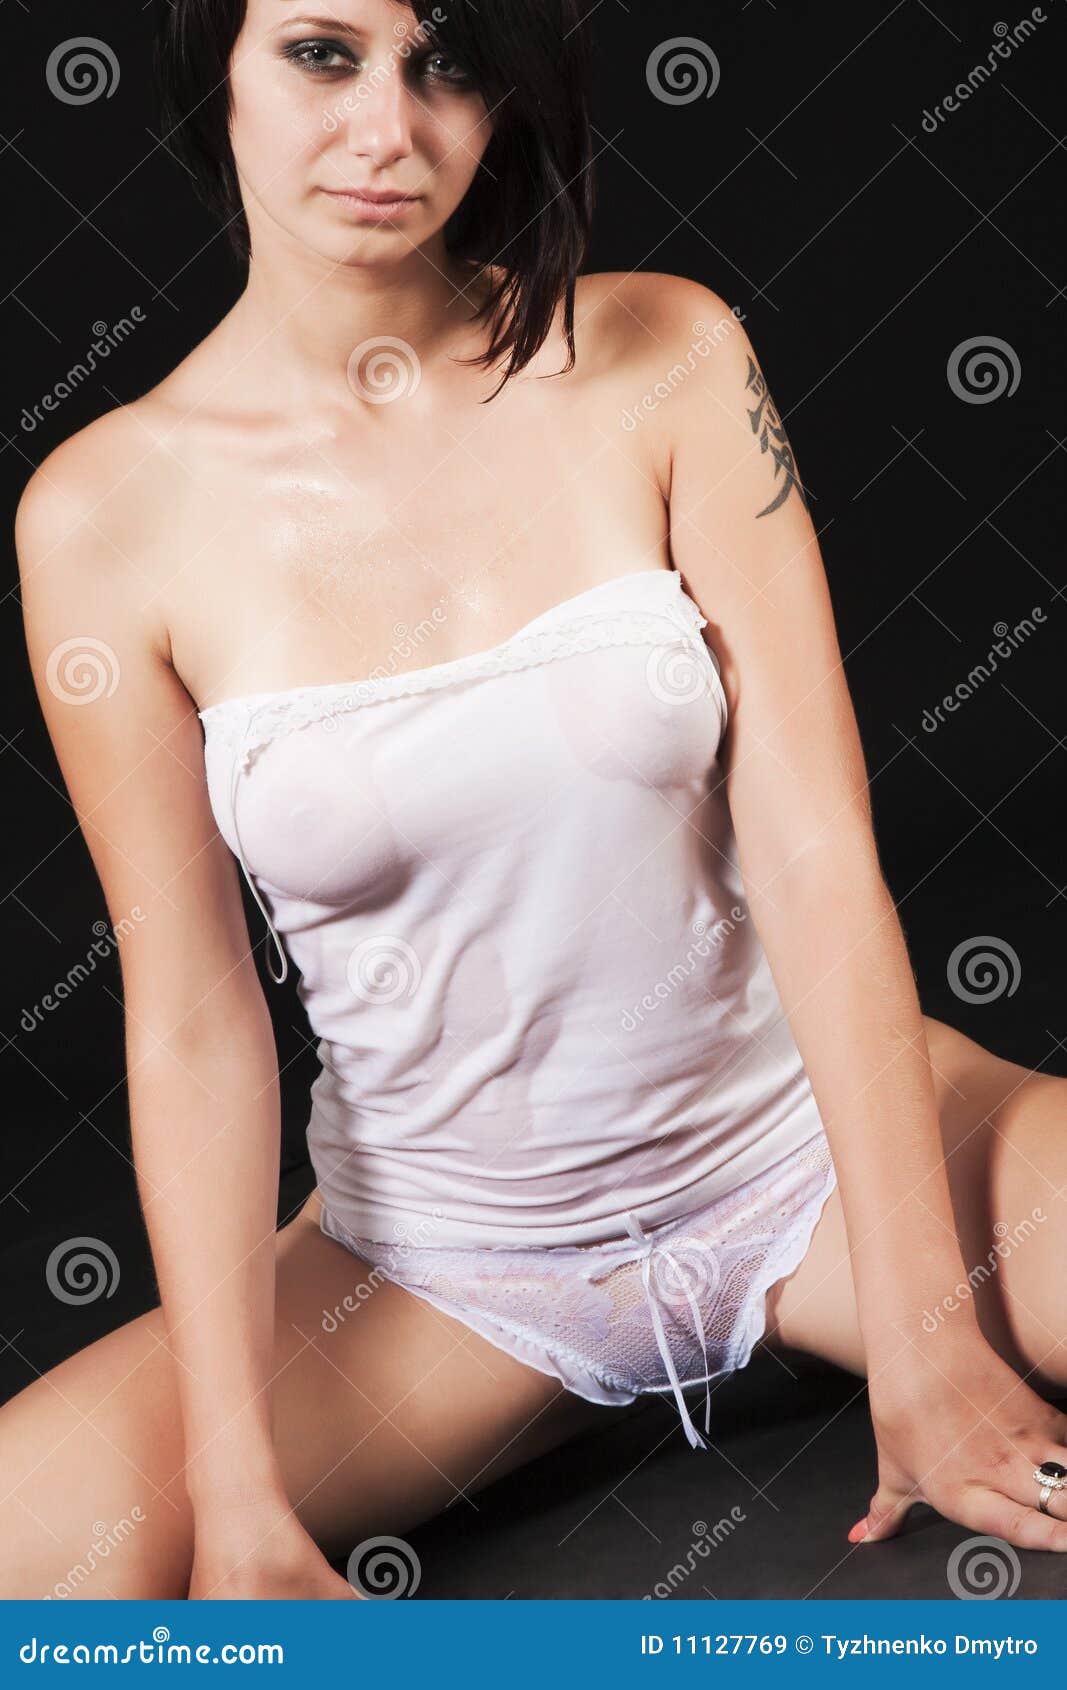 becky bunce recommends women in wet t shirts pic